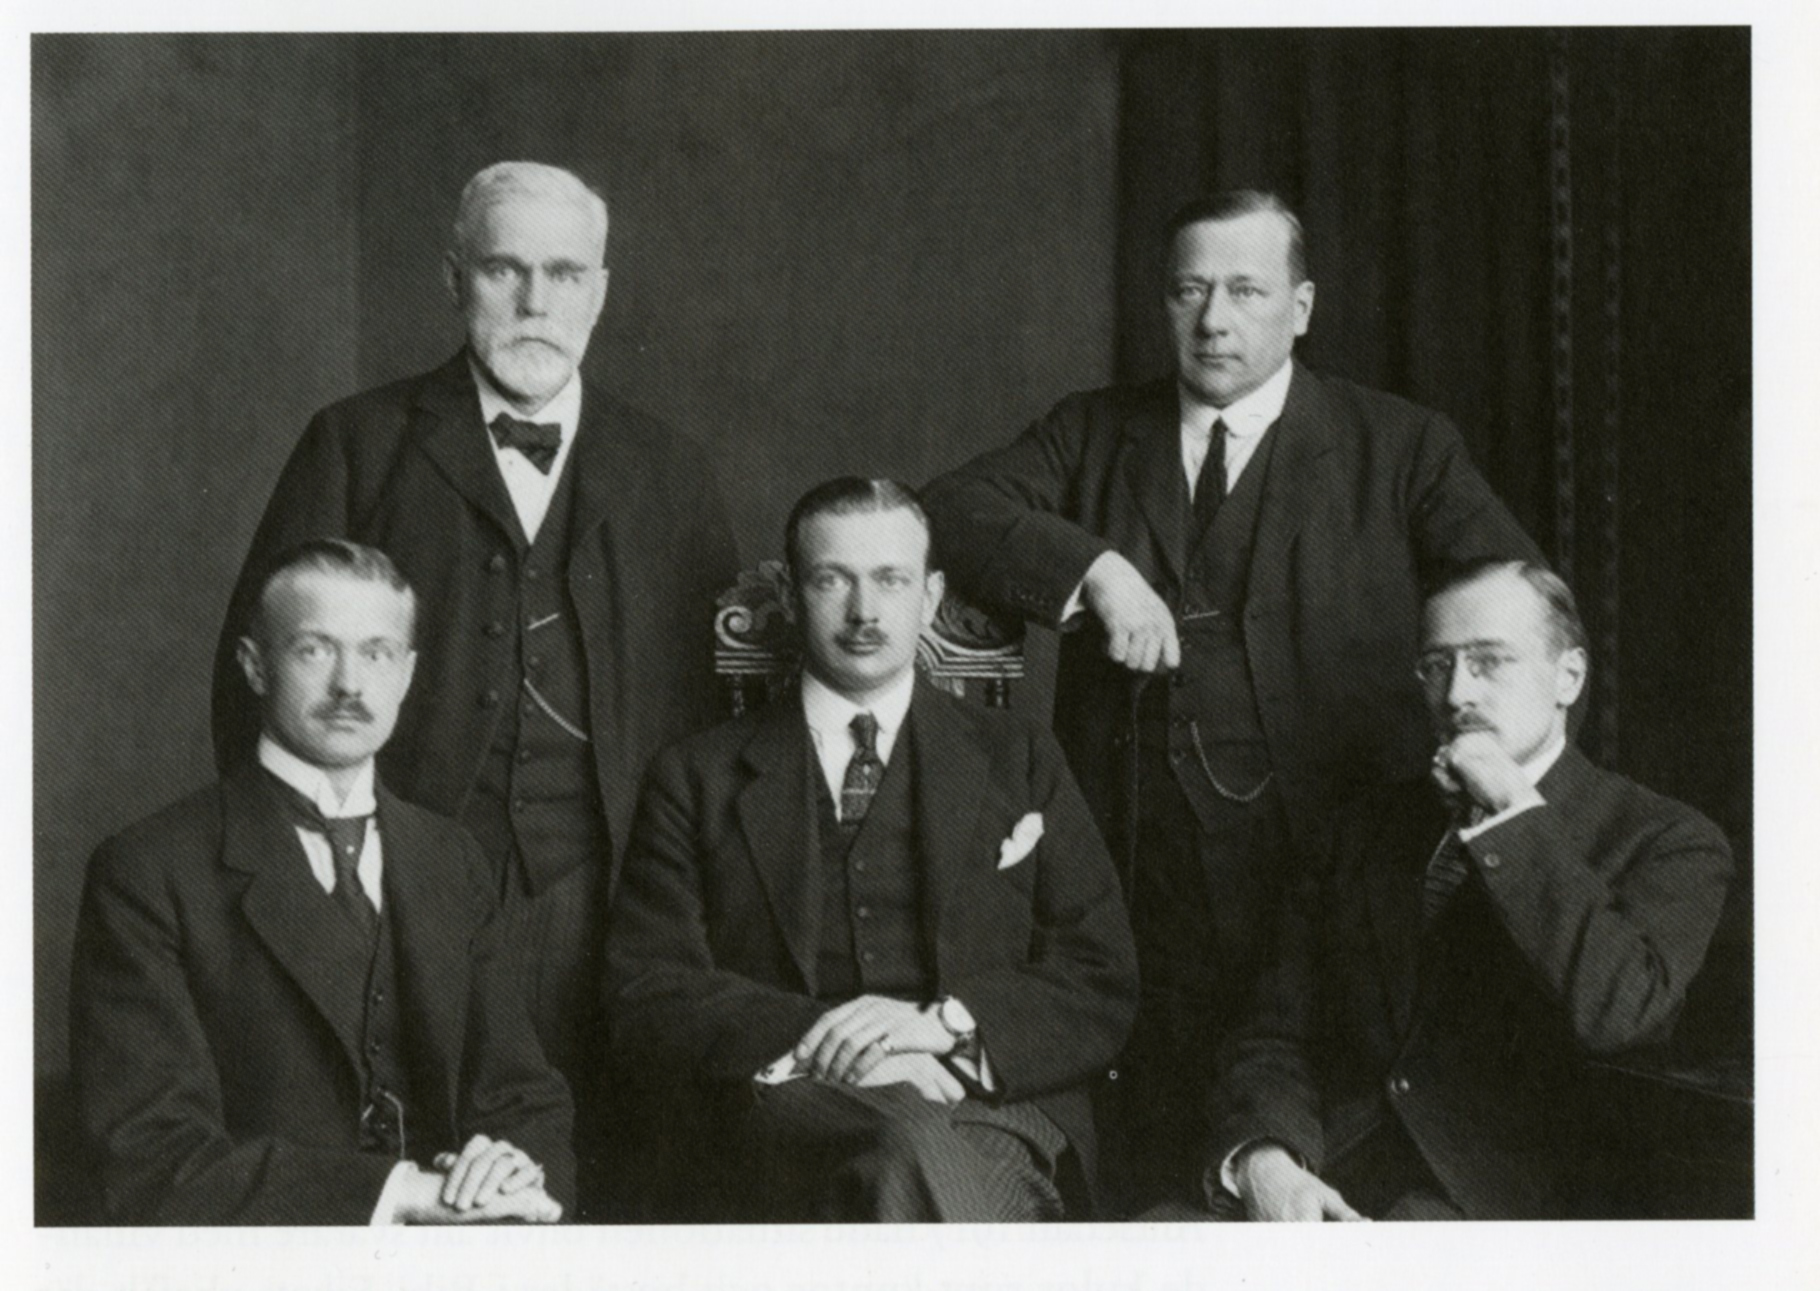 Gösta Nobel, bottom right, together with his brothers Rolf, Emanuel, Emil and Ludvig.